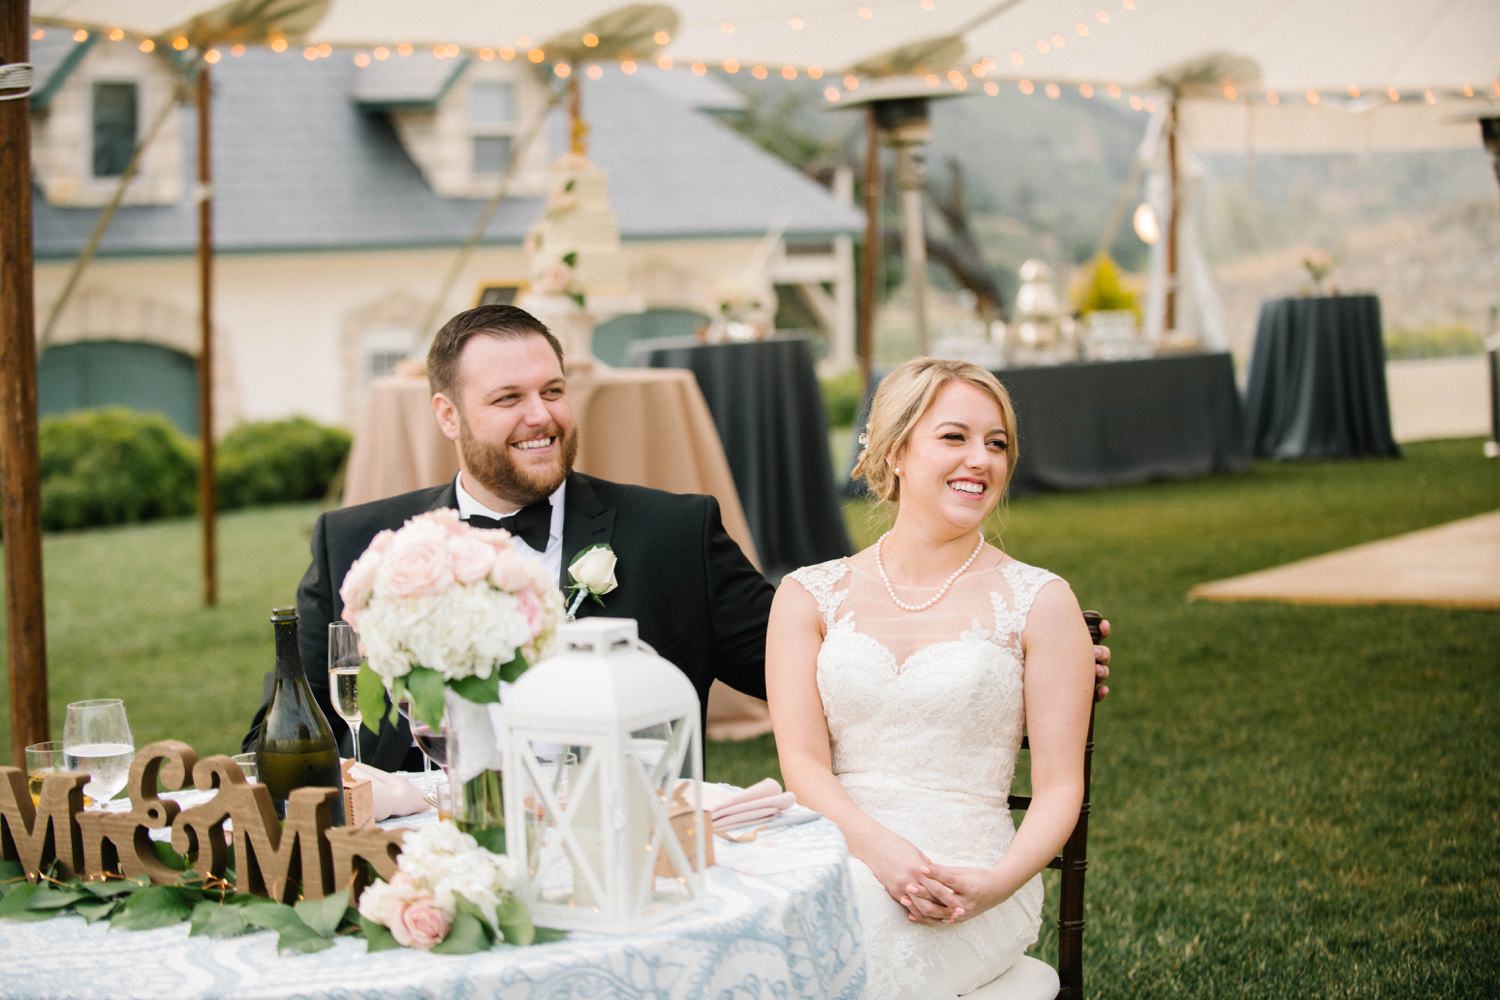 Bride and groom at sweetheart table during reception at Noland Castle Wedding by SLO Wedding Photographer Austyn Elizabeth Photography.